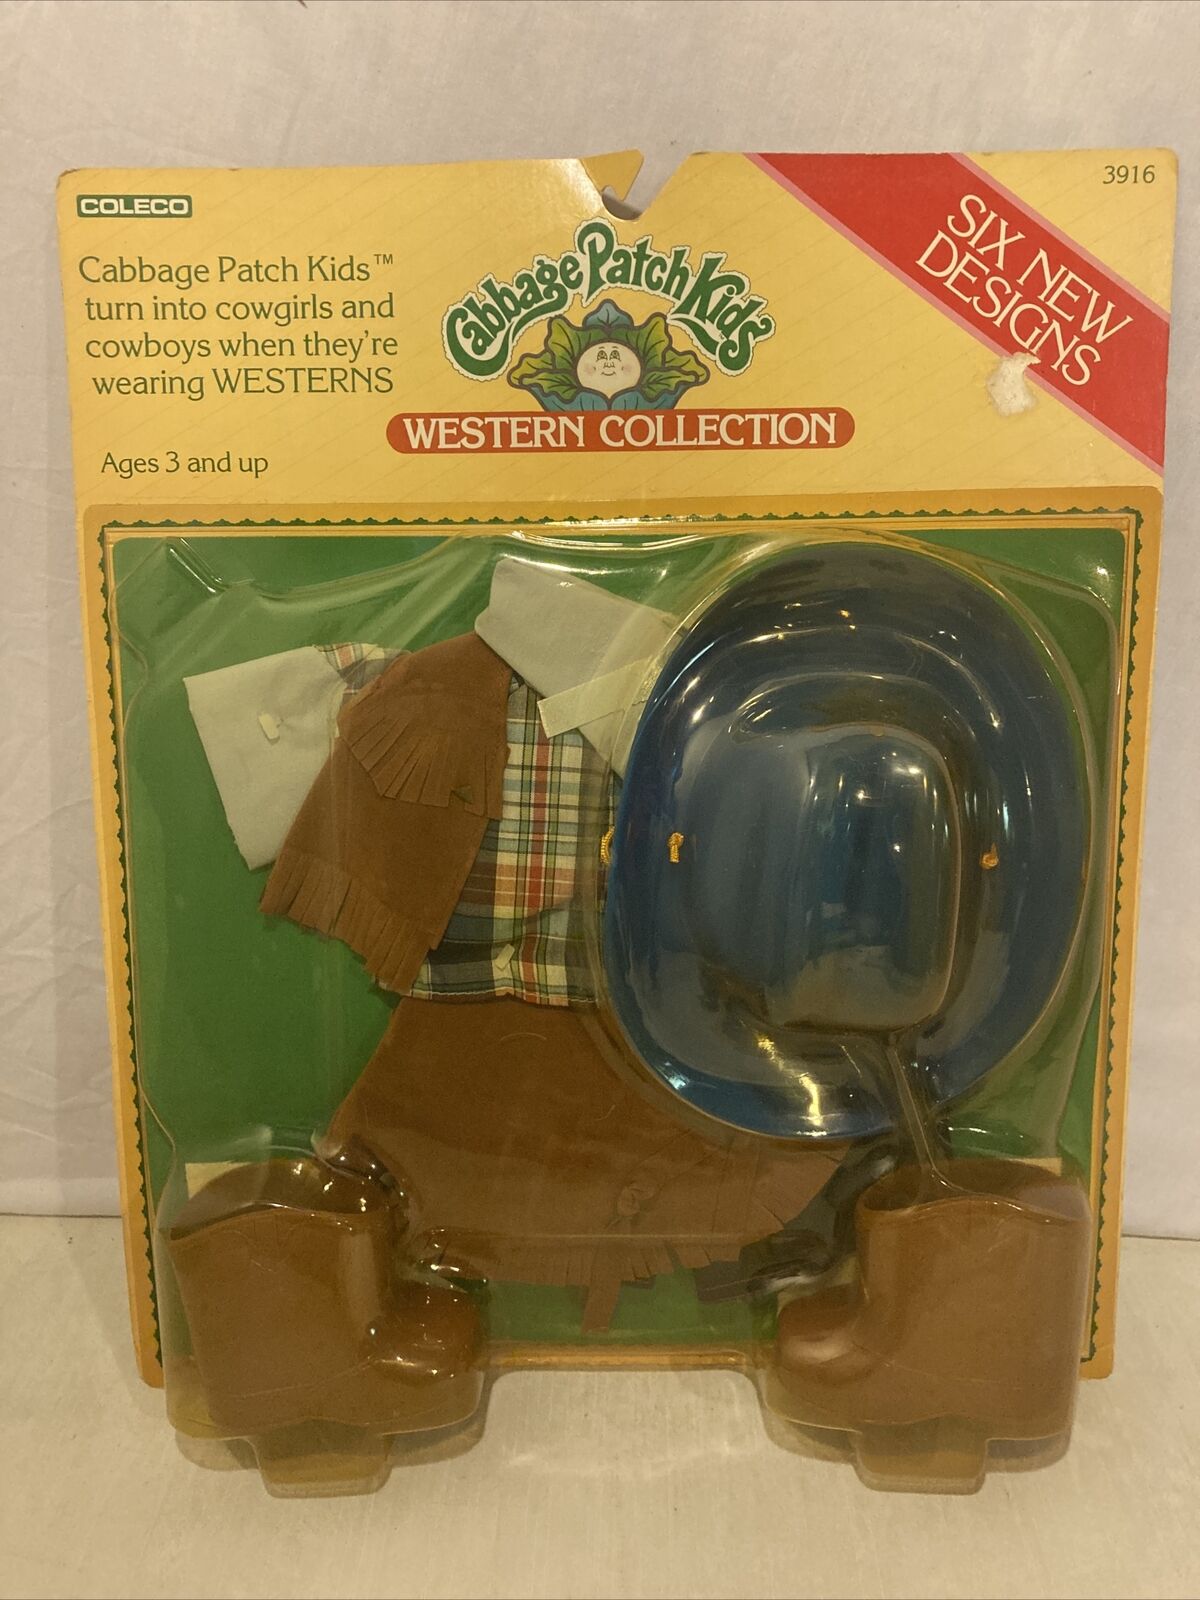 Vintage Western Outfit For Cabbage Patch Kids Doll - Coleco 3916 - 1984 - Nib